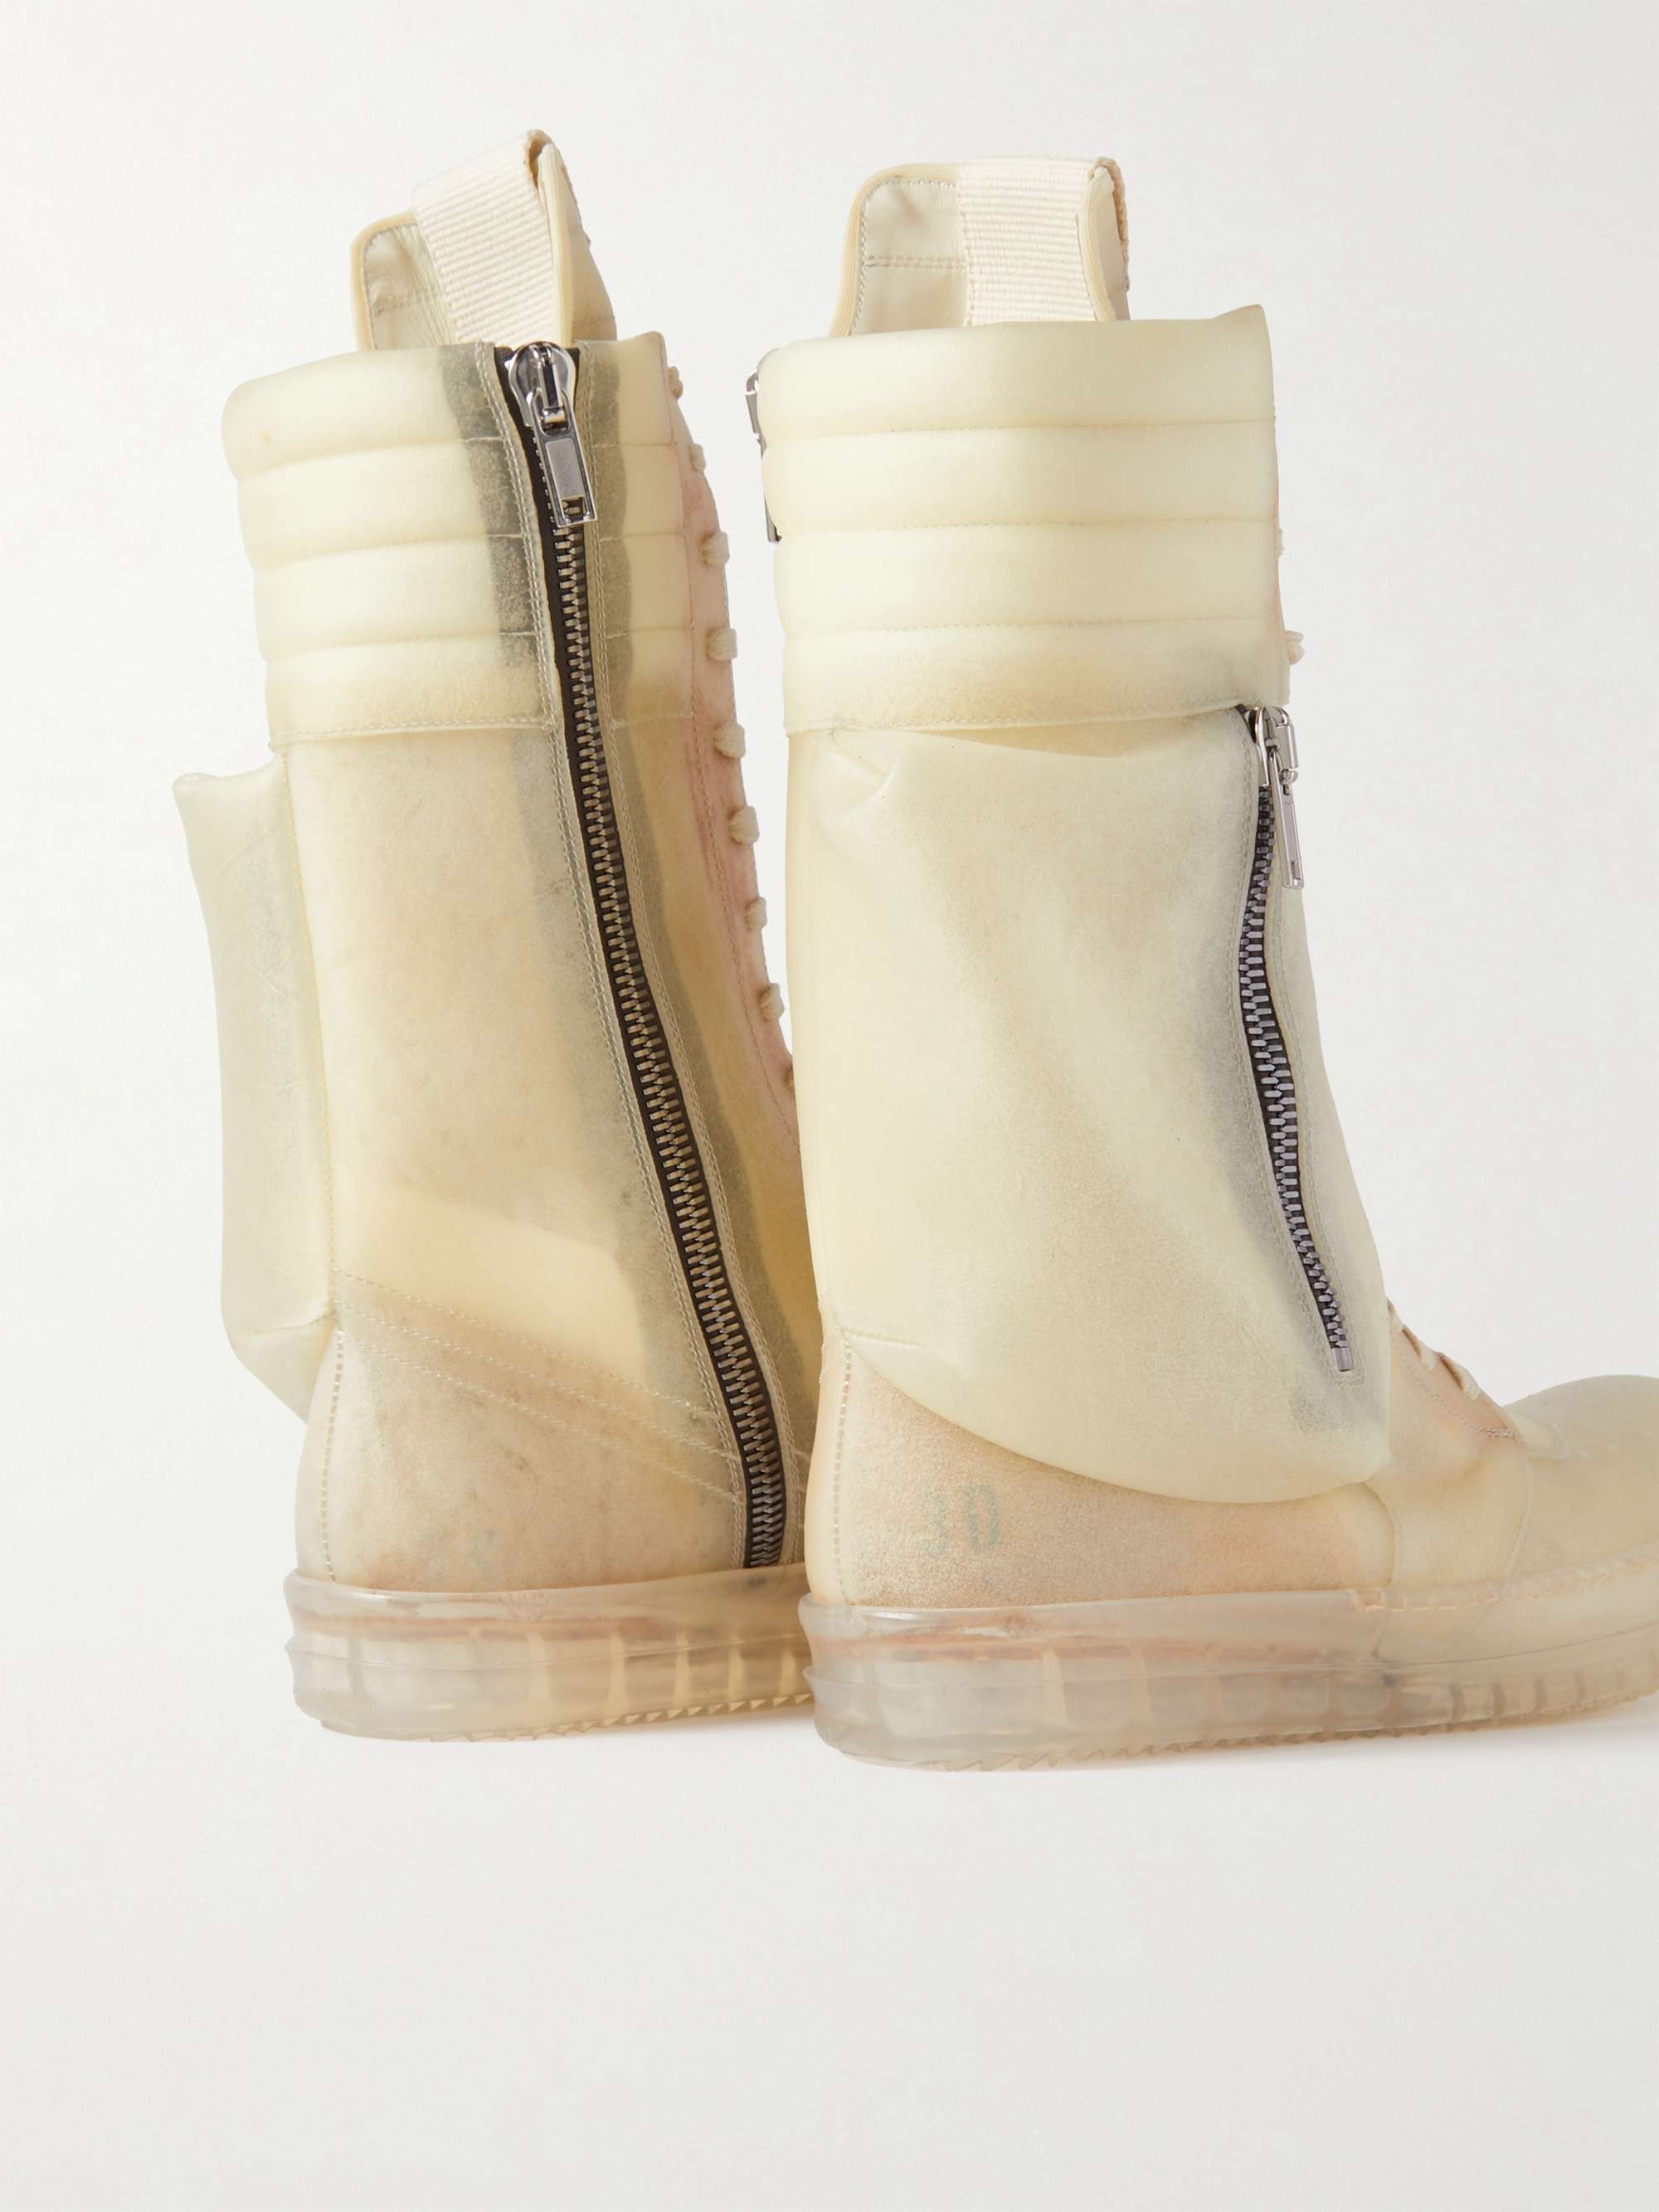 RICK OWENS Cargobasket Transparent Leather High-Top Sneakers